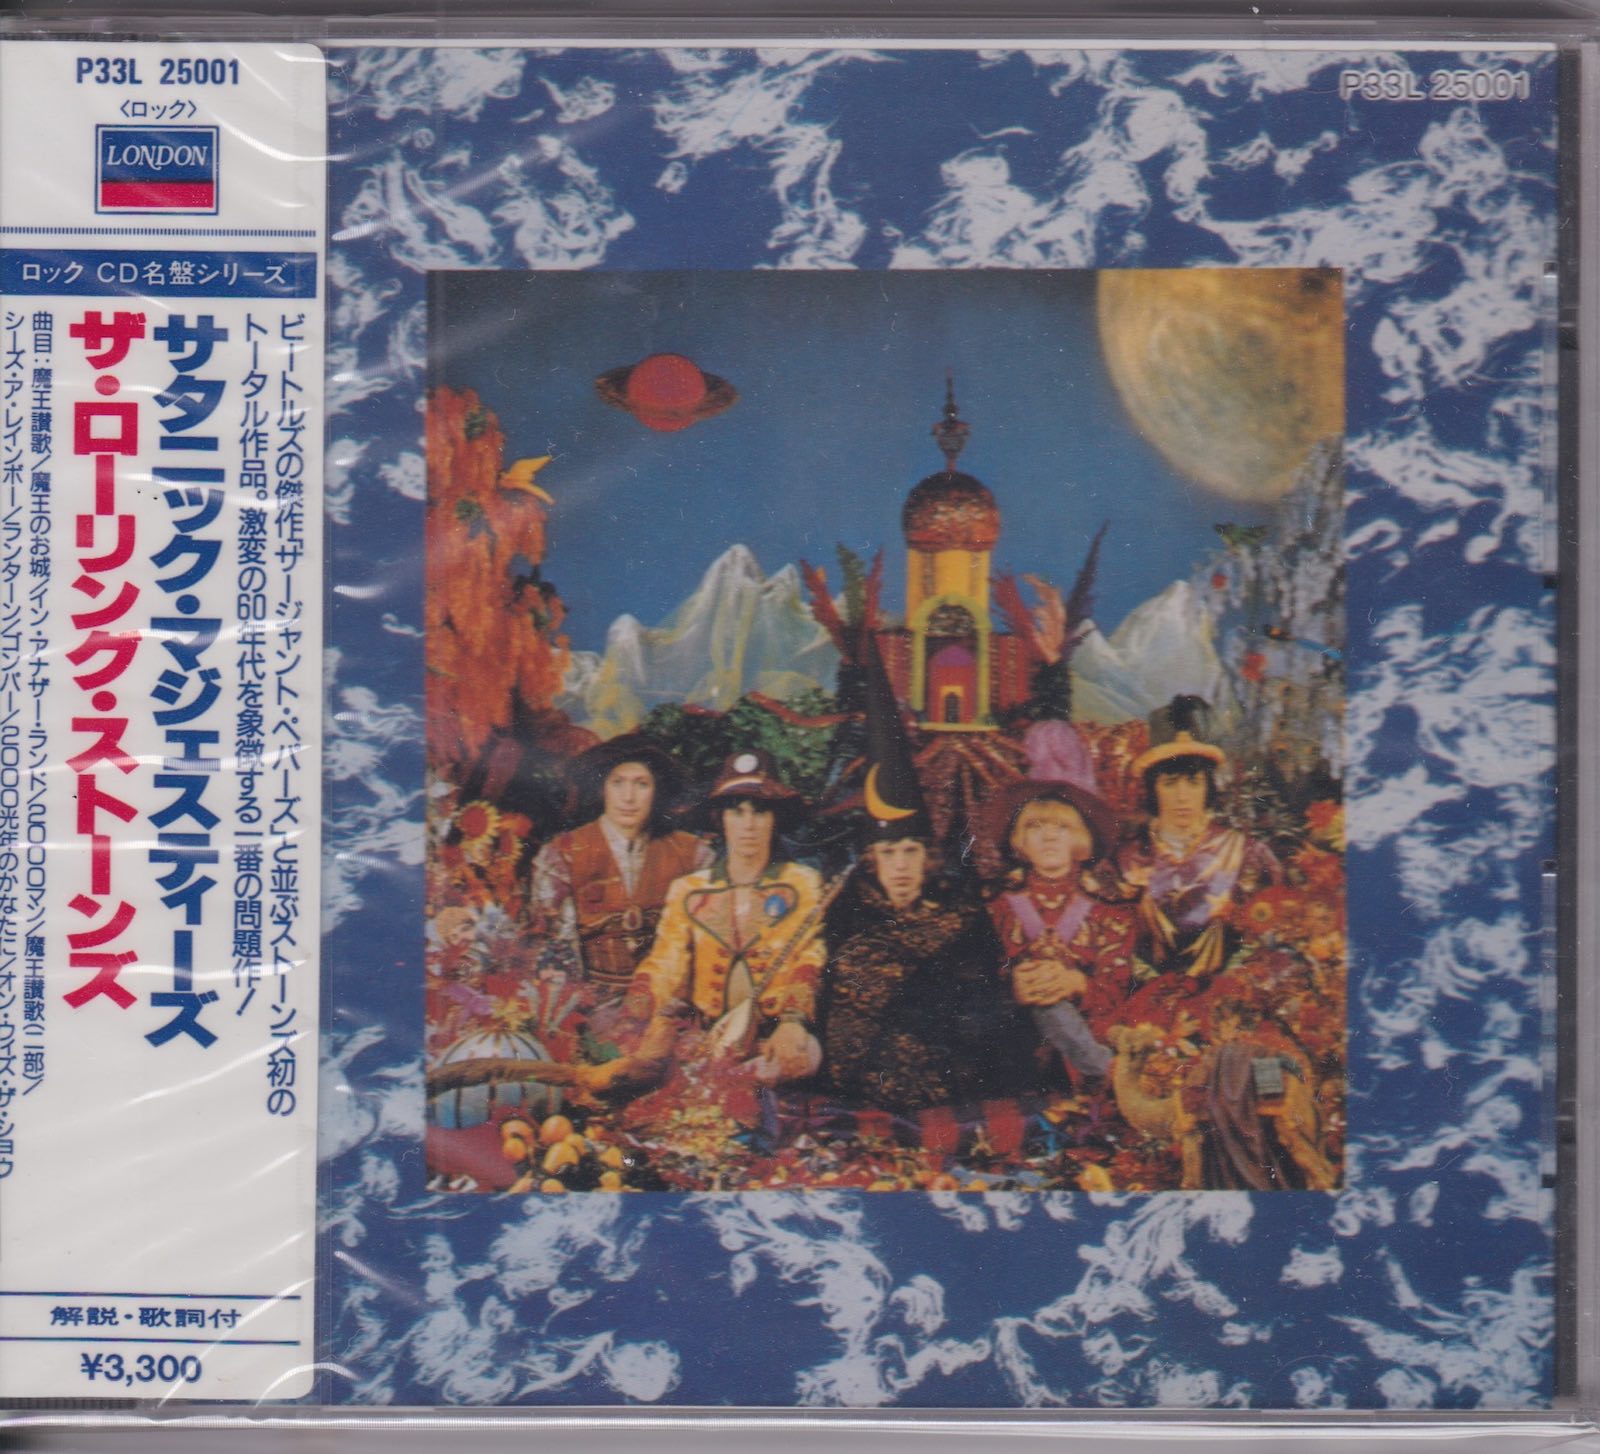 The Rolling Stones ‎– Their Satanic Majesties Request